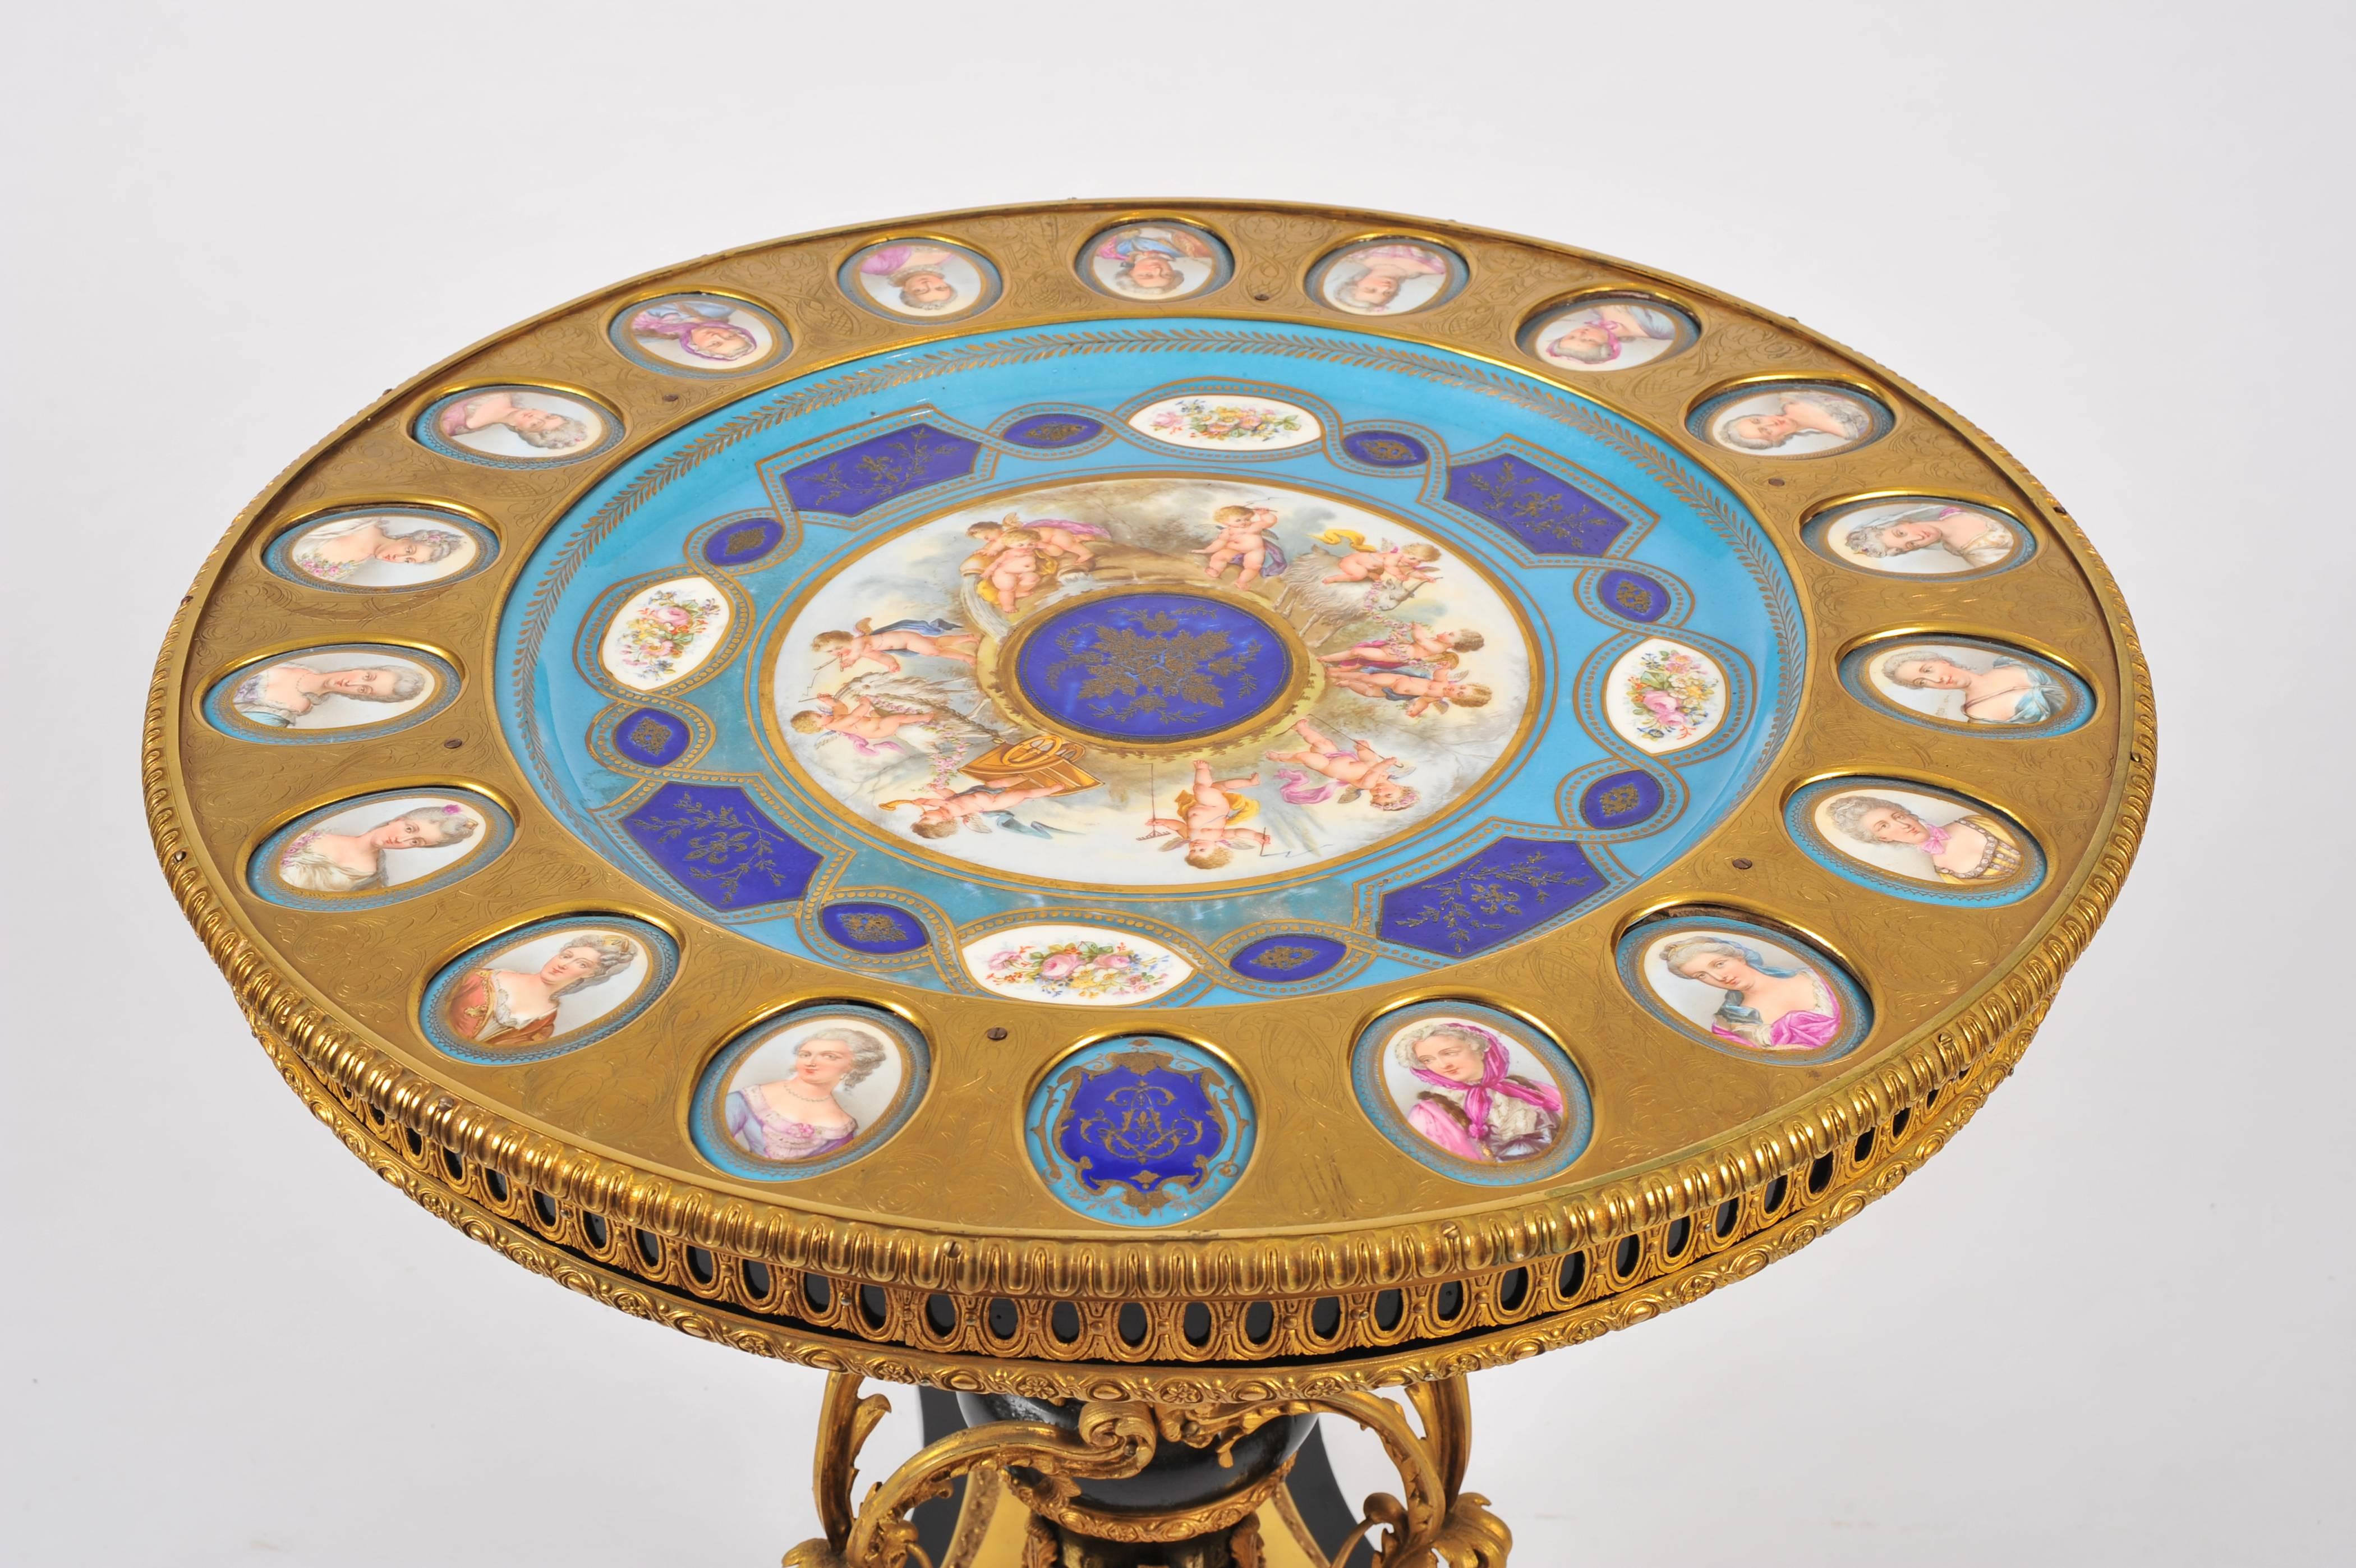 This magnificent ormolu table is supported on an ornate triform pedestal base. The top features a gilt bronze pierced gallery and a large and stunning Sevres porcelain plate encircled by 18 portrait plaques. This table would make a beautiful focal